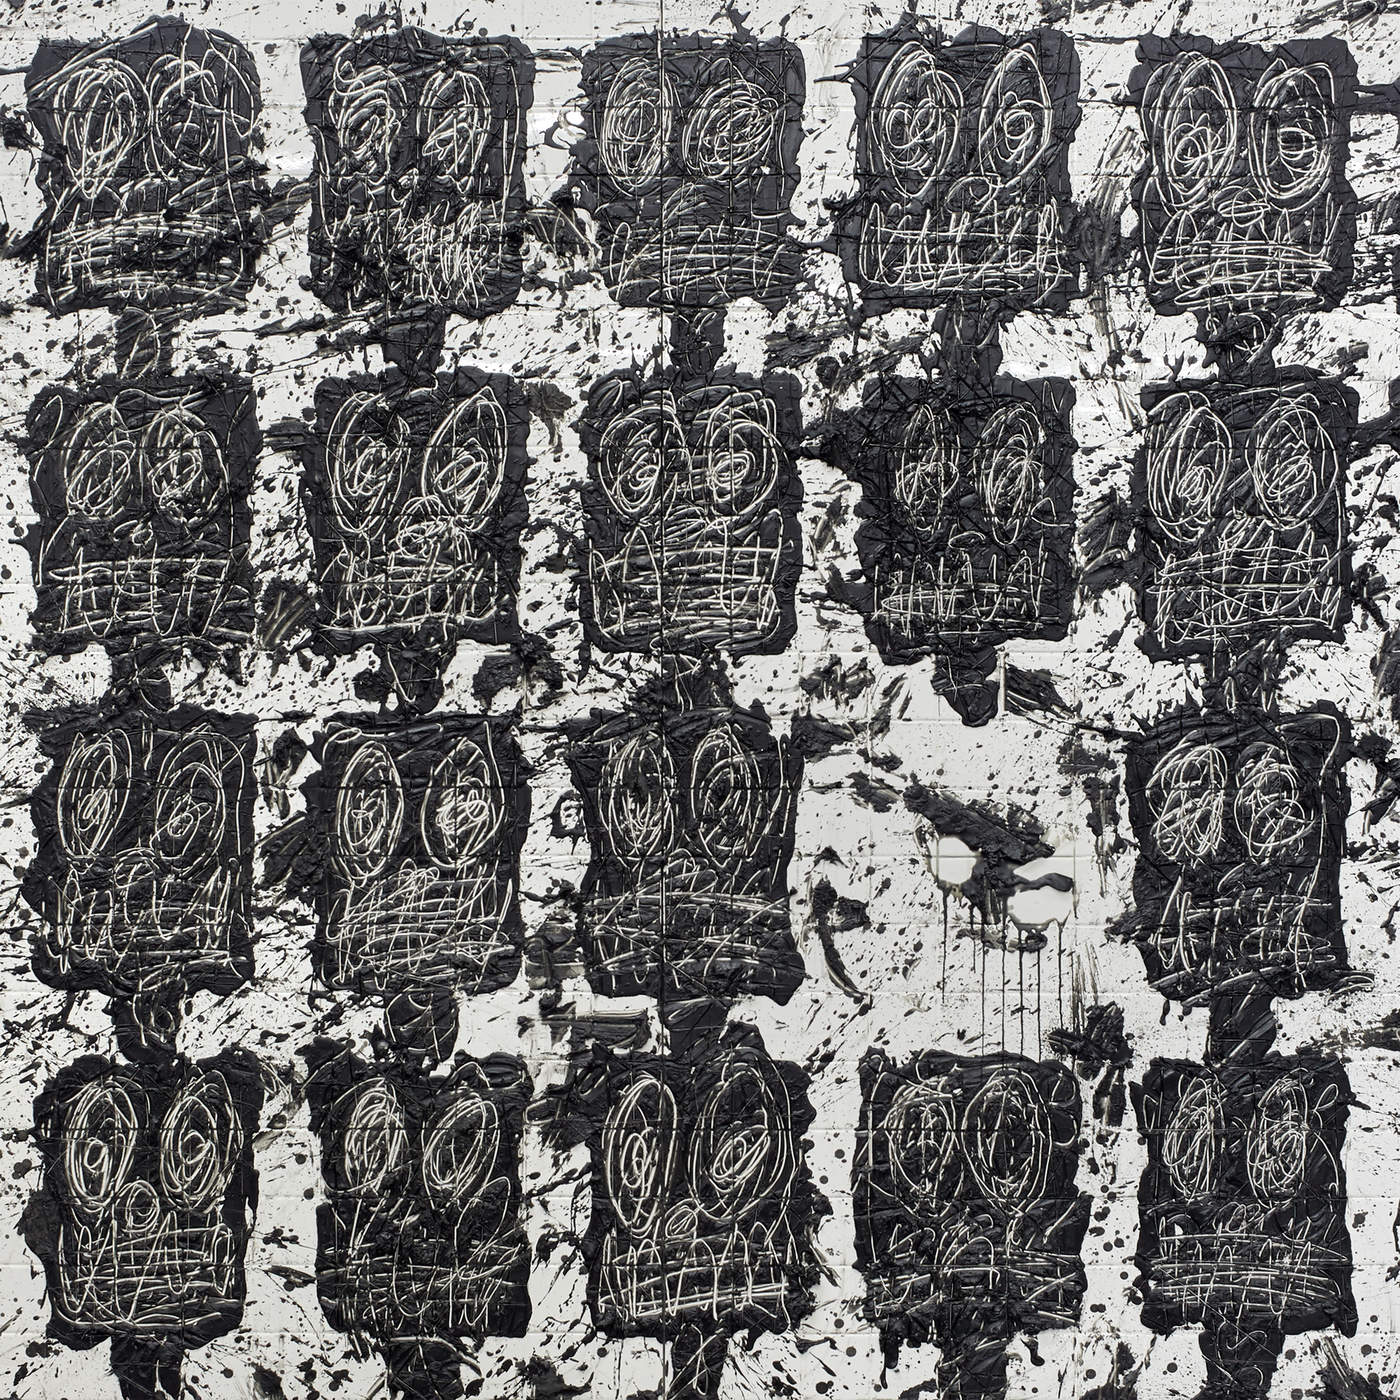 Black Thought & 9th Wonder – Streams of Thought, Vol. 1 [EP Stream]